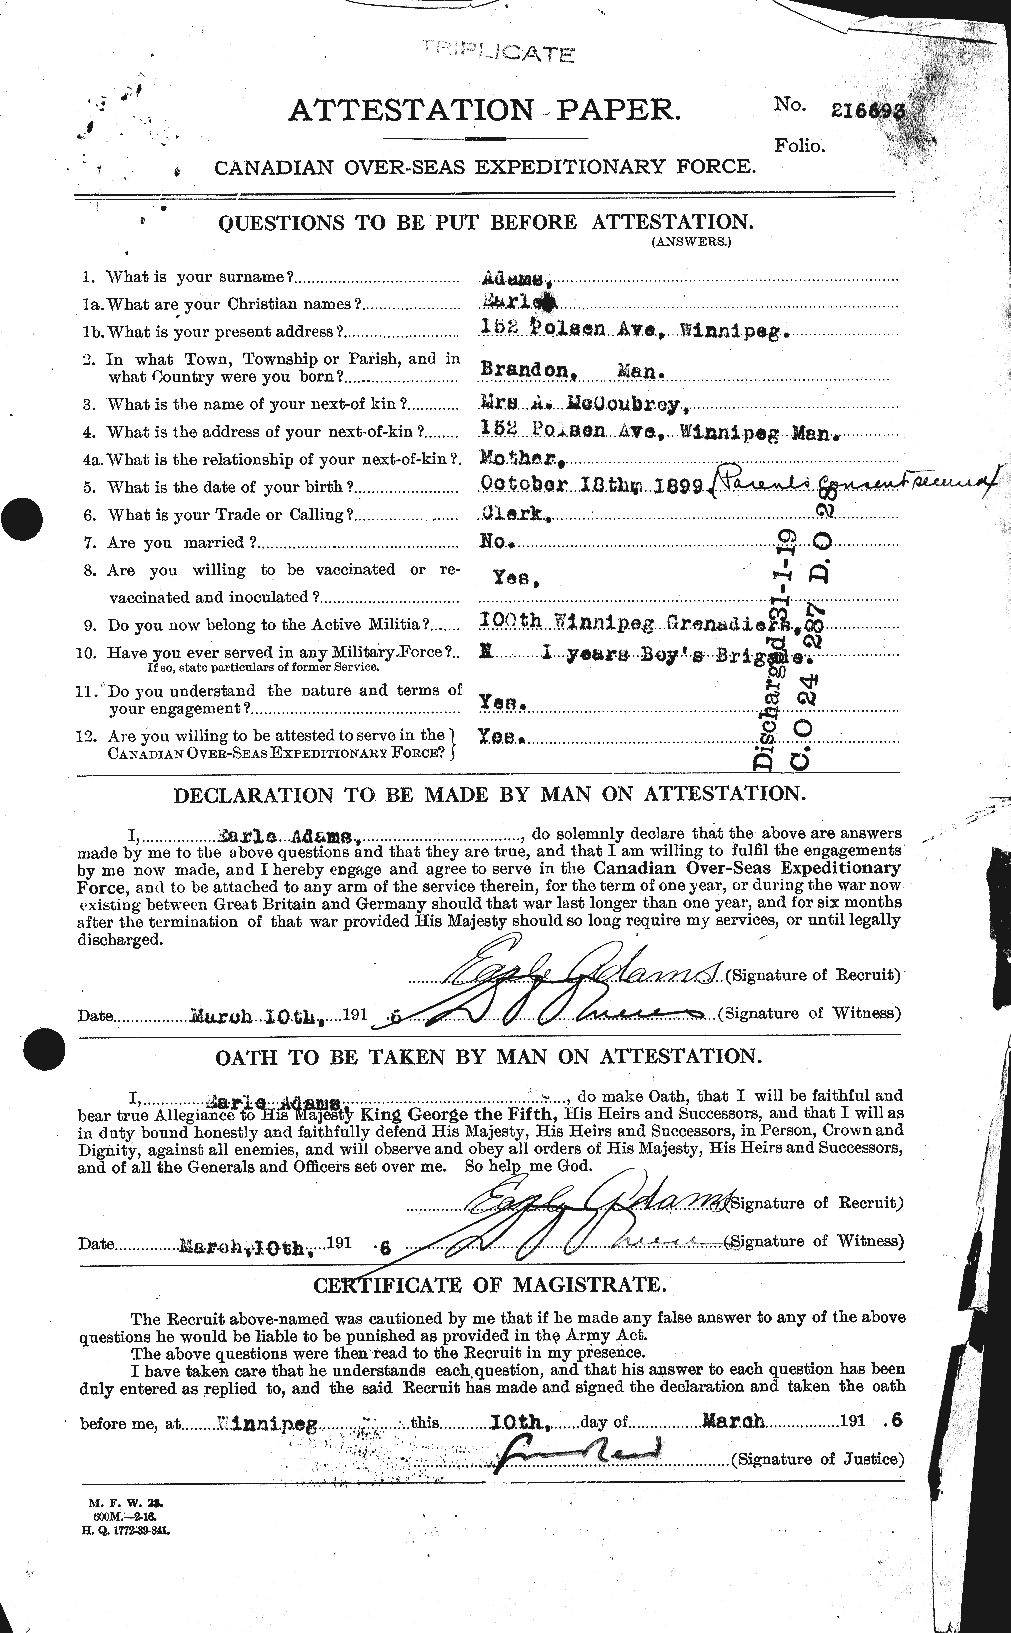 Personnel Records of the First World War - CEF 202664a